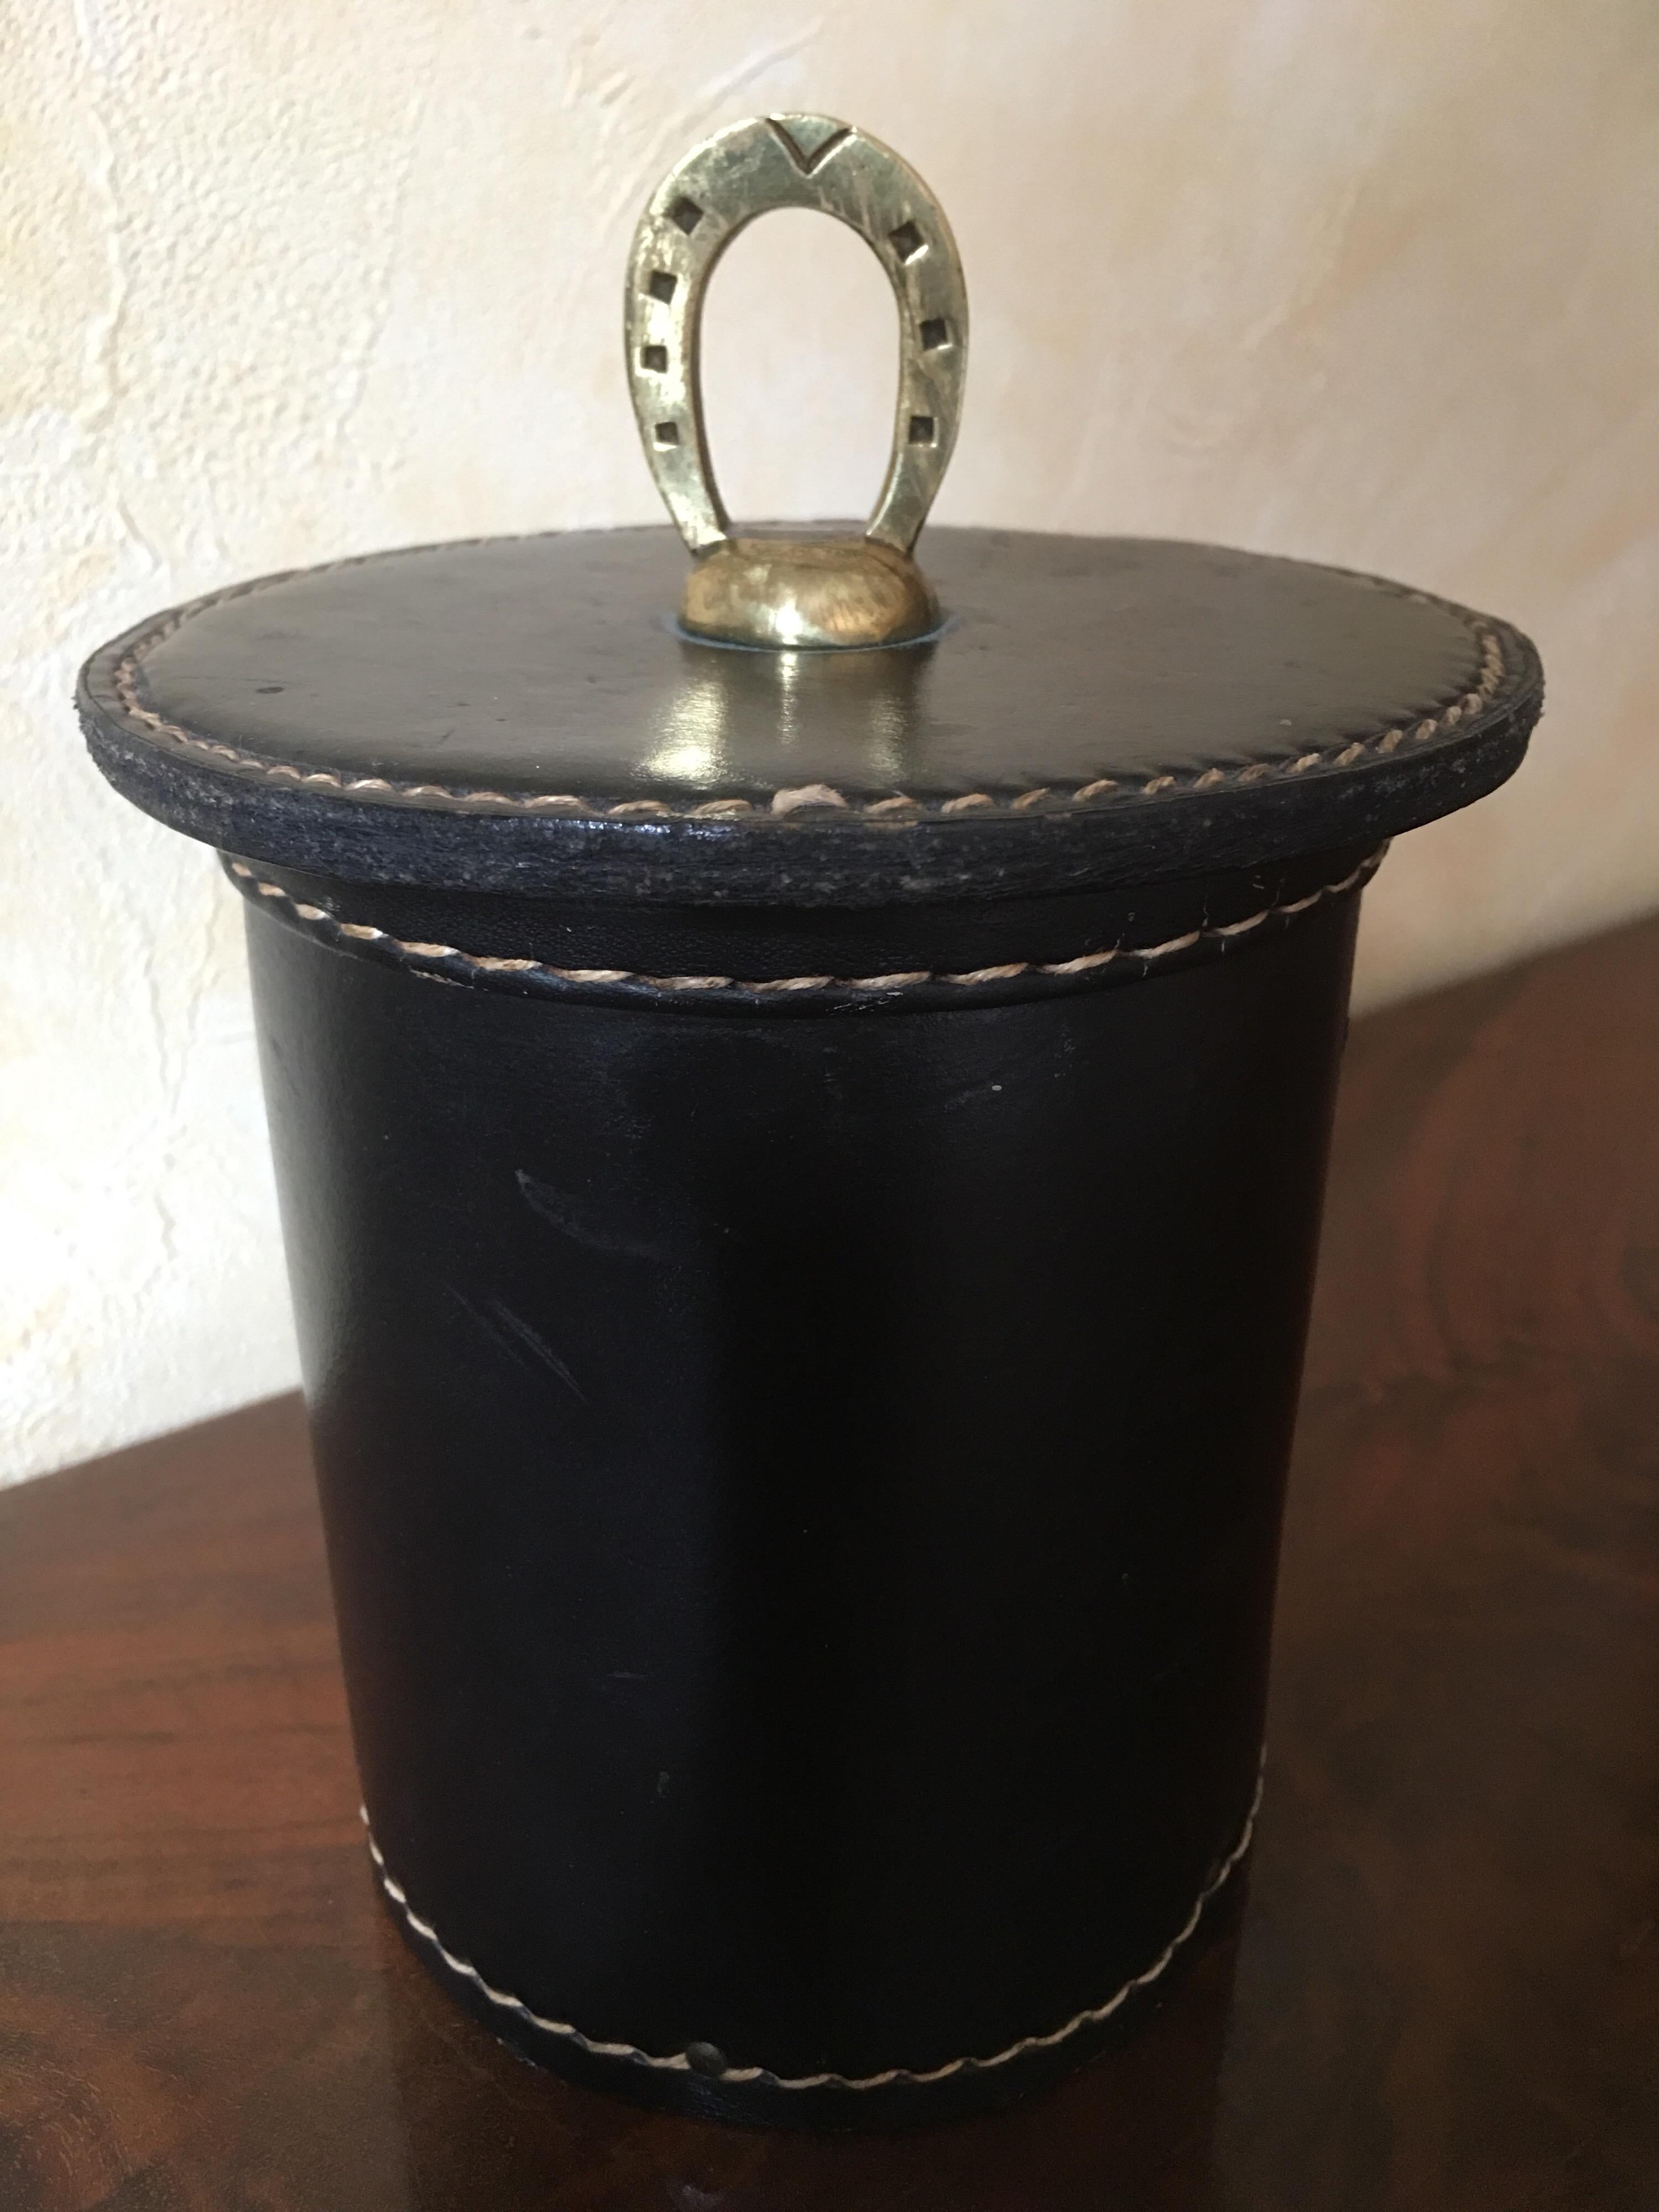 Rare black stitched leather box designed by Jacques Adnet in France in 1950s.
Original leather with very minor wear, bronze gripping ring in the shape of a horseshoe. In very good condition.
A copy of an original photo in 1950s with a similar box